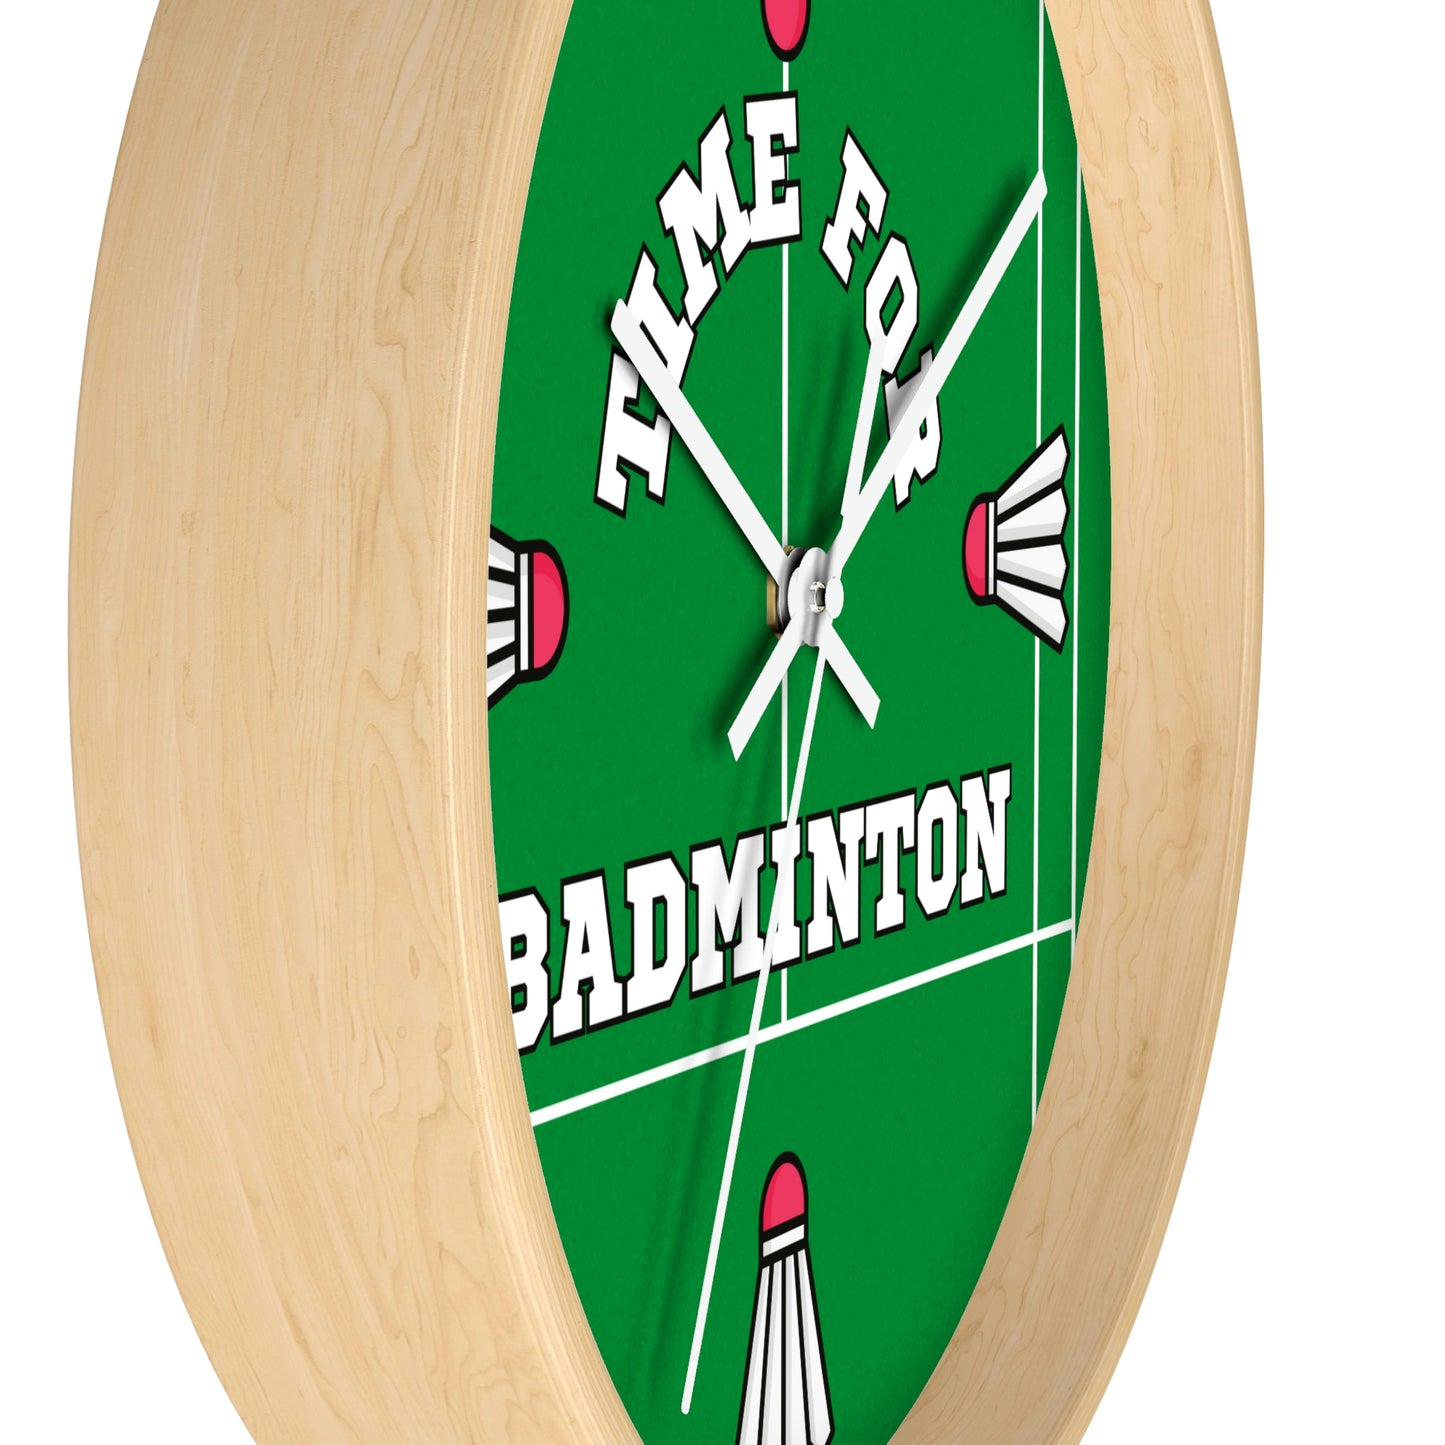 Time for Badminton Clock!